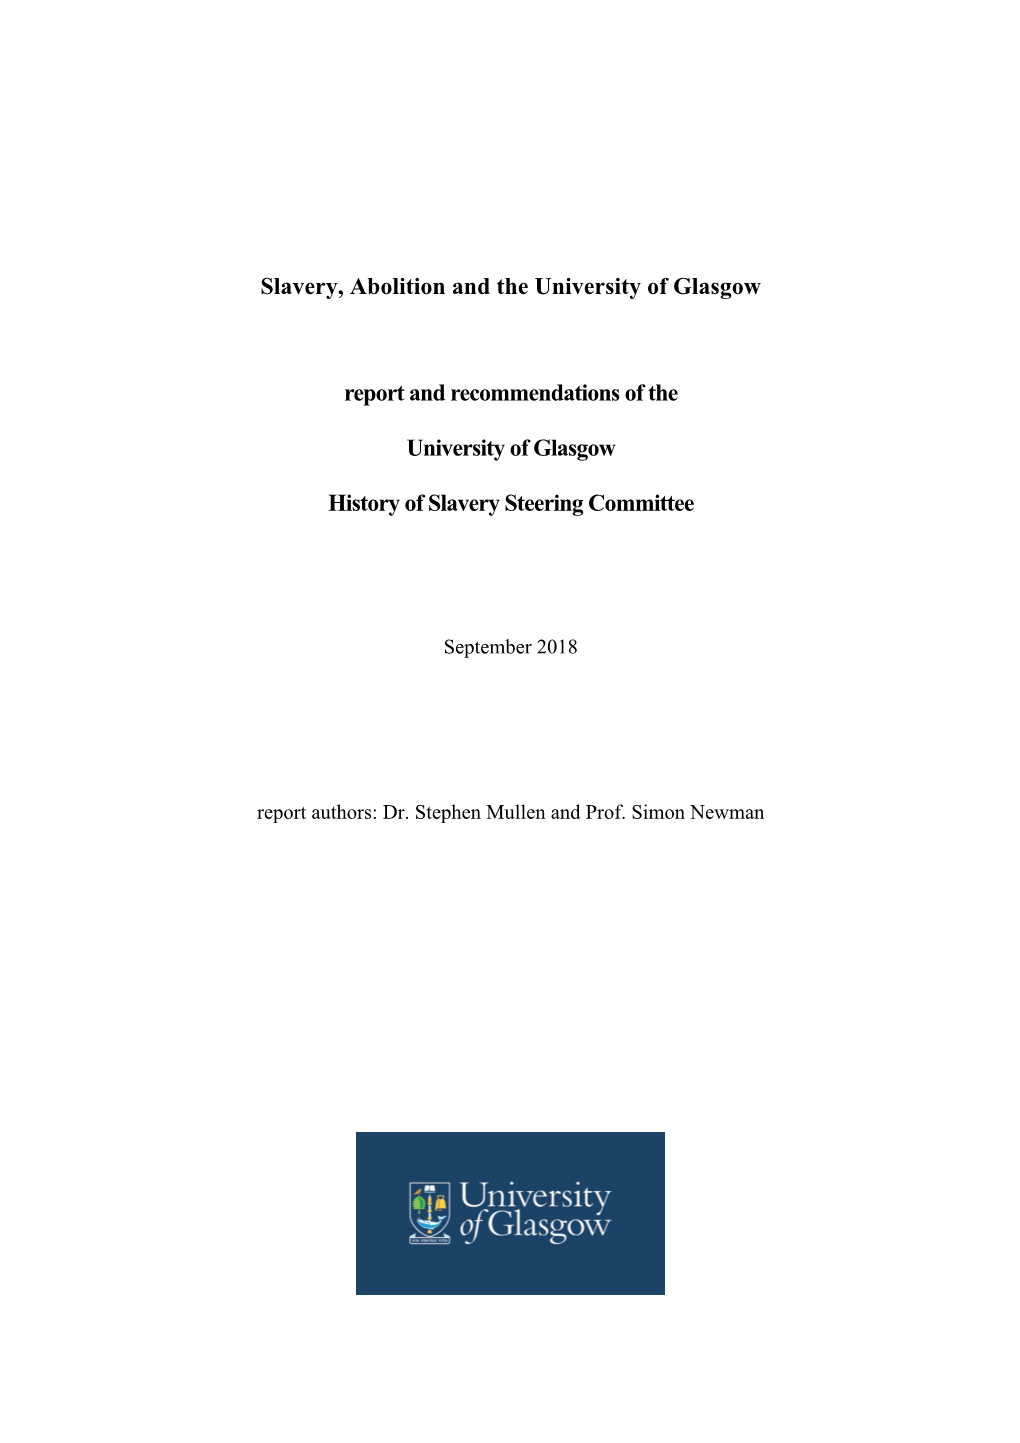 Slavery, Abolition and the University of Glasgow Report